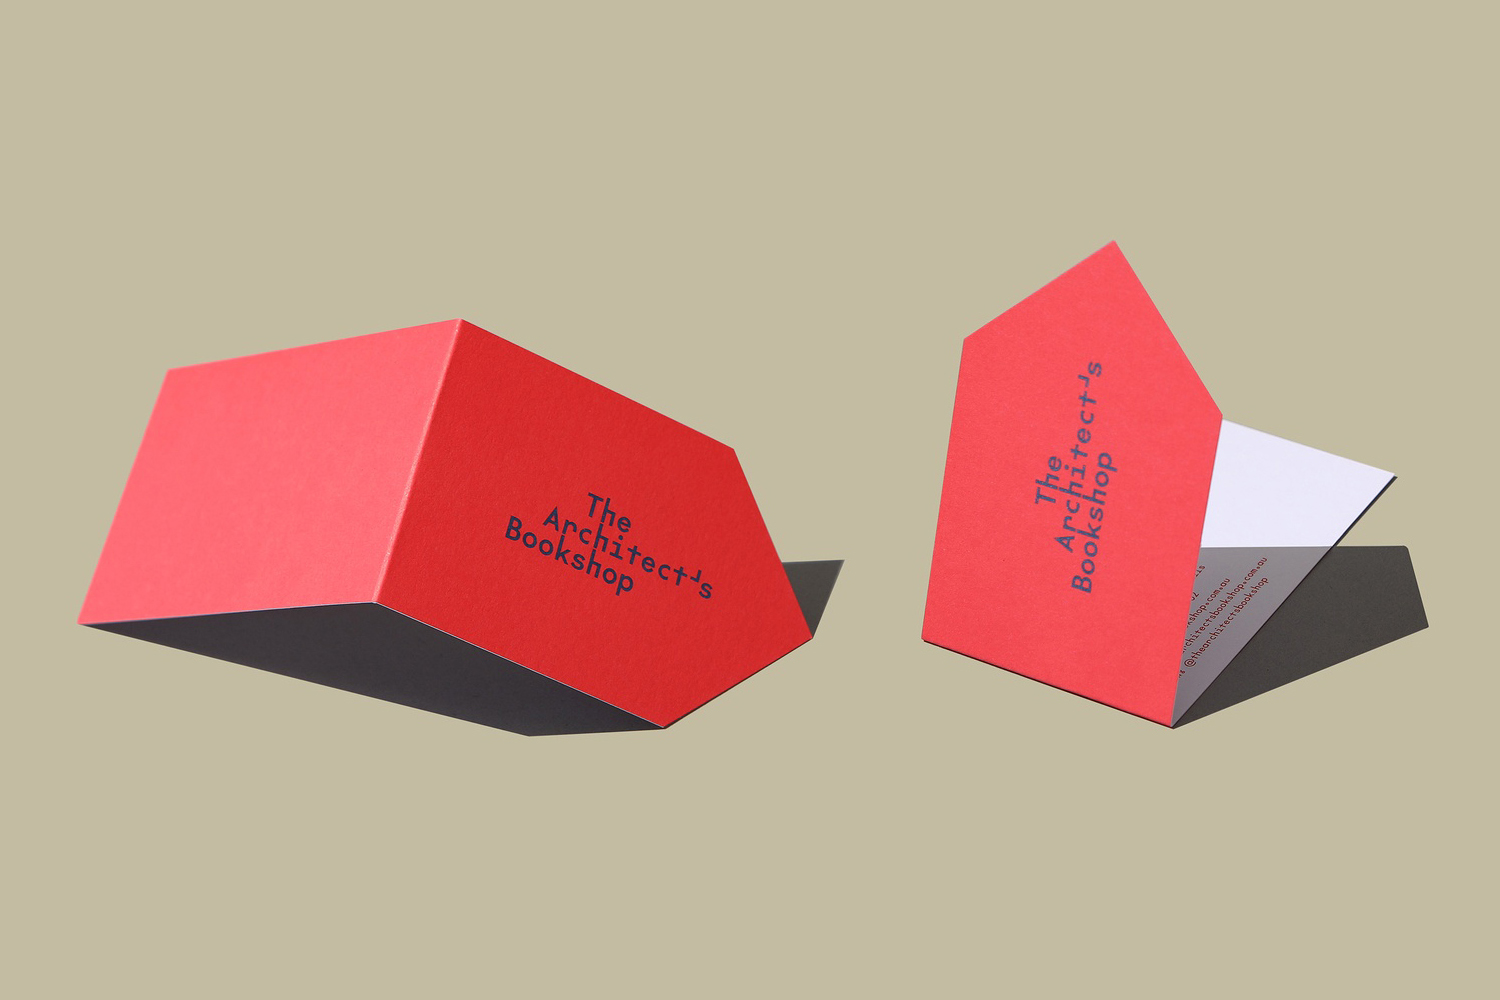 Creative Business Cards – The Architect’s Bookshop by Garbett